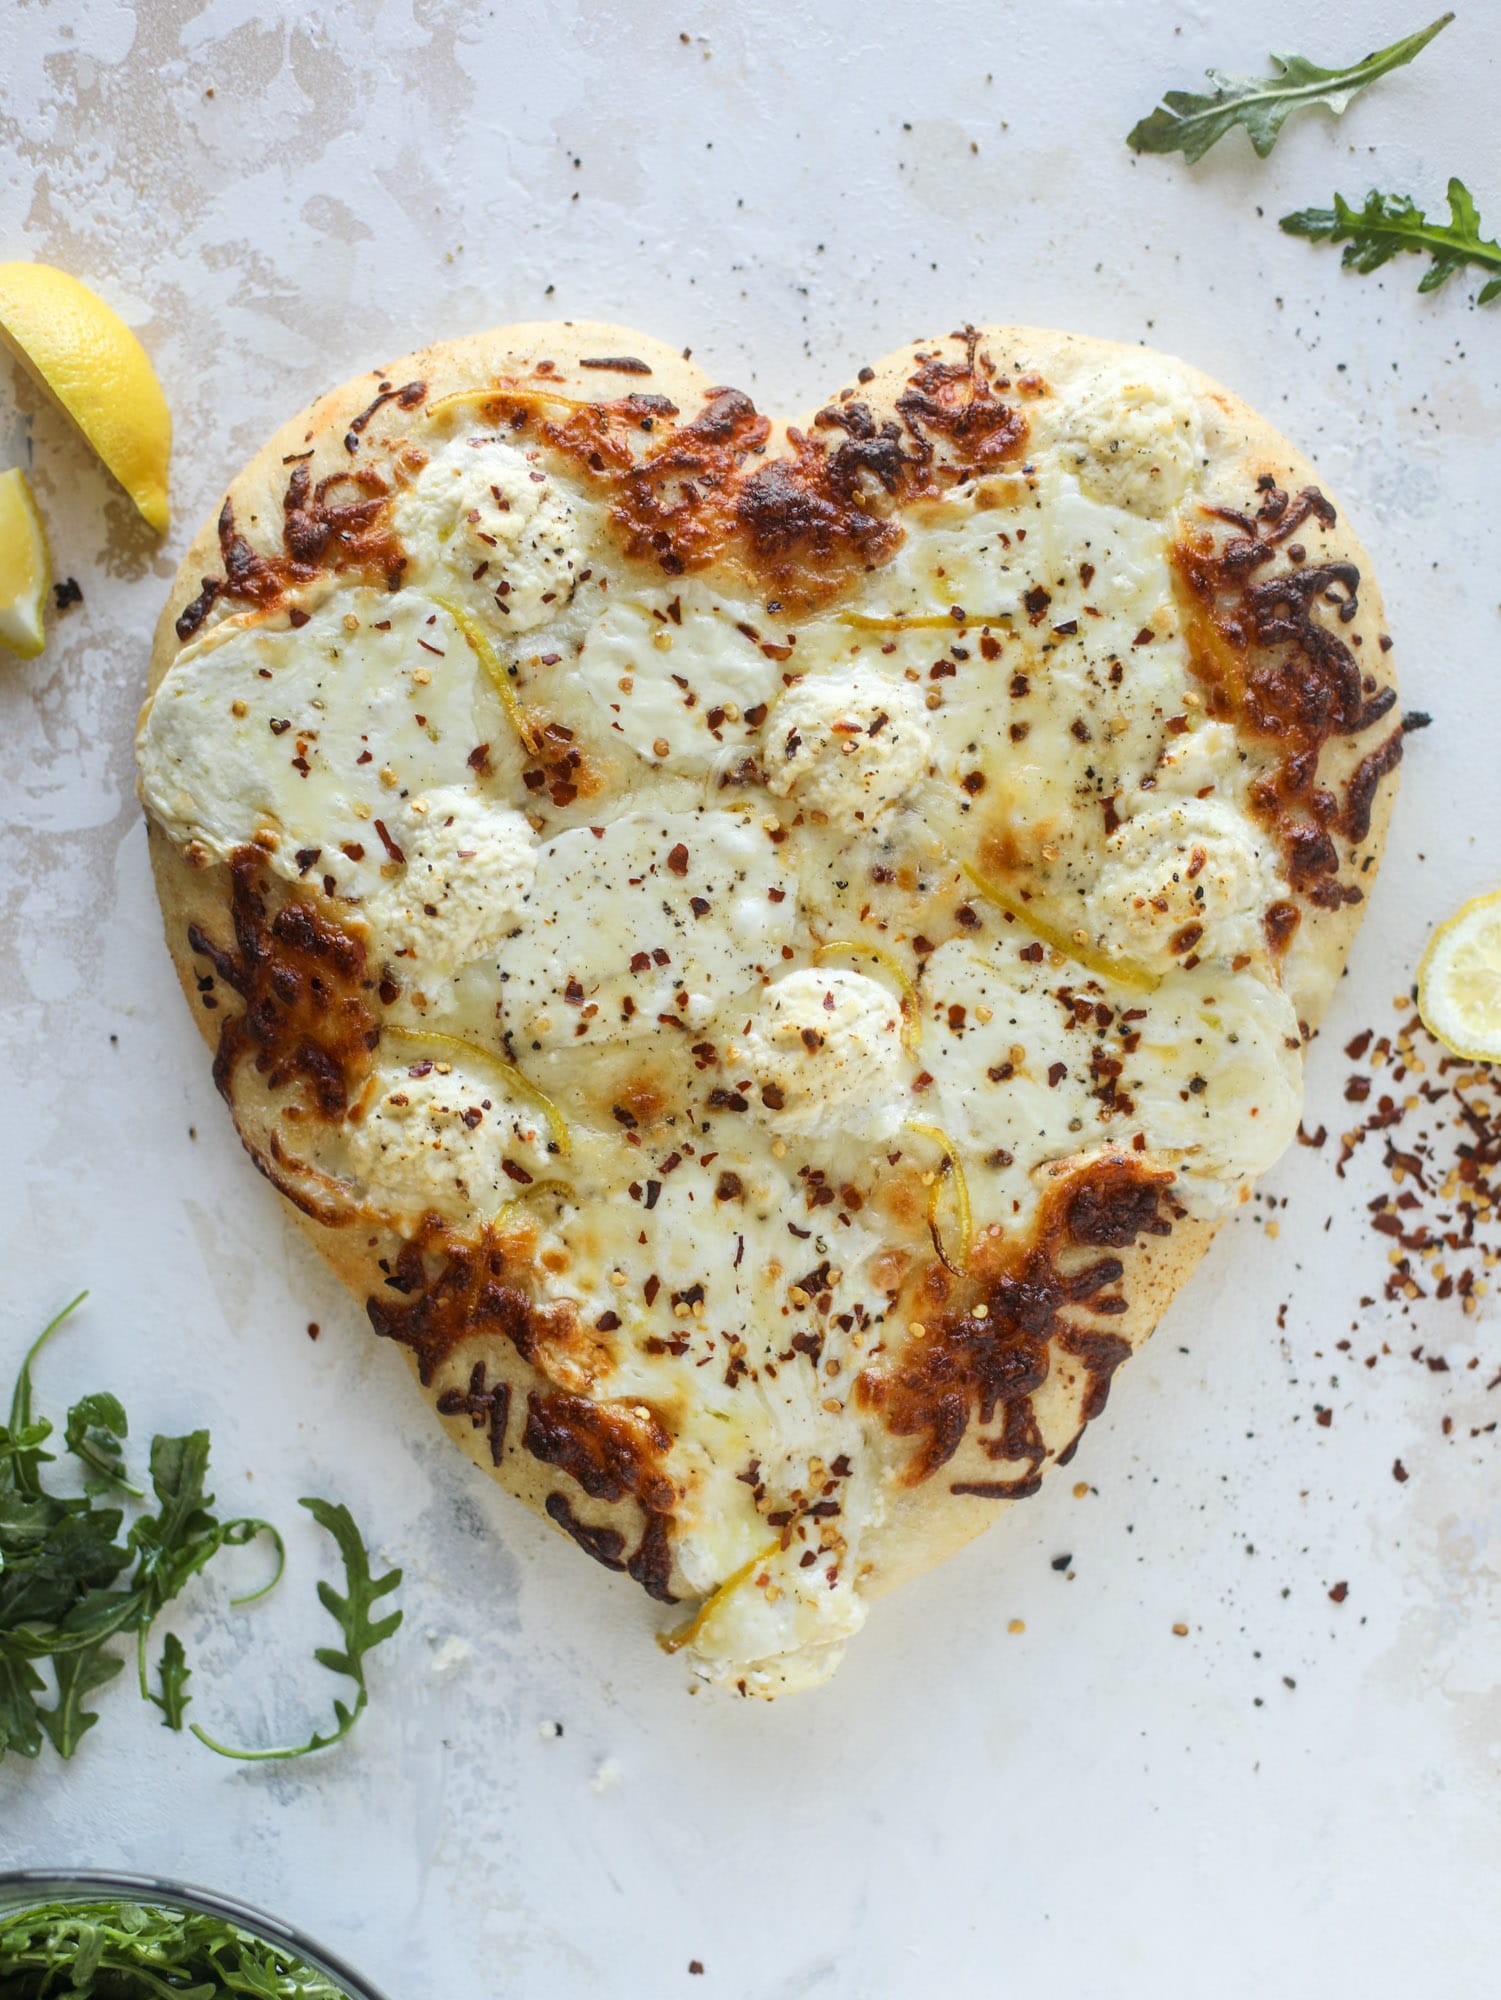 20 of my favorite recipes for Valentine's Day